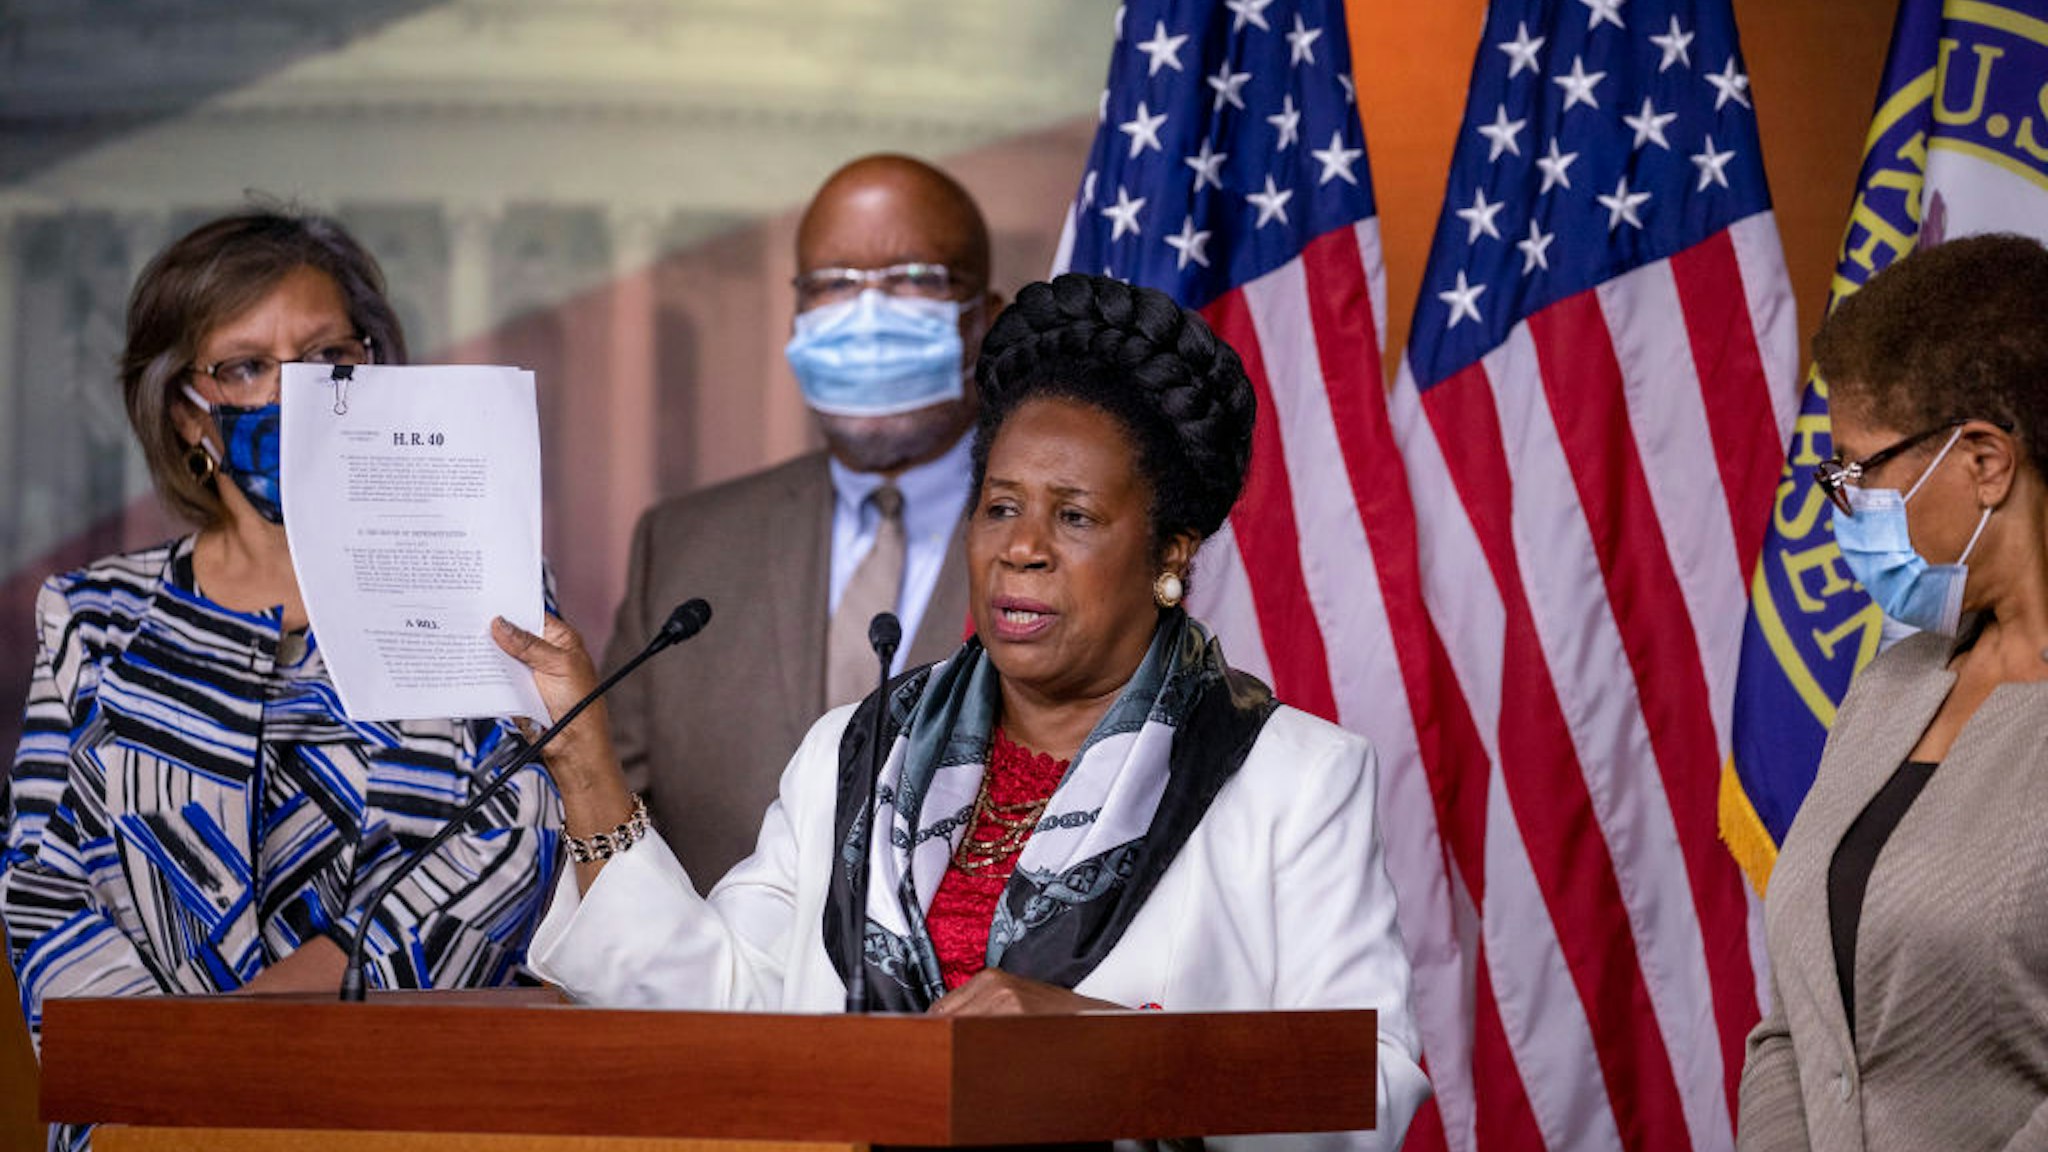 U.S. Rep. Sheila Jackson Lee (D-TX) speaks at a Congressional Black Caucus press conference on Capitol Hill on July 01, 2020 in Washington, DC.